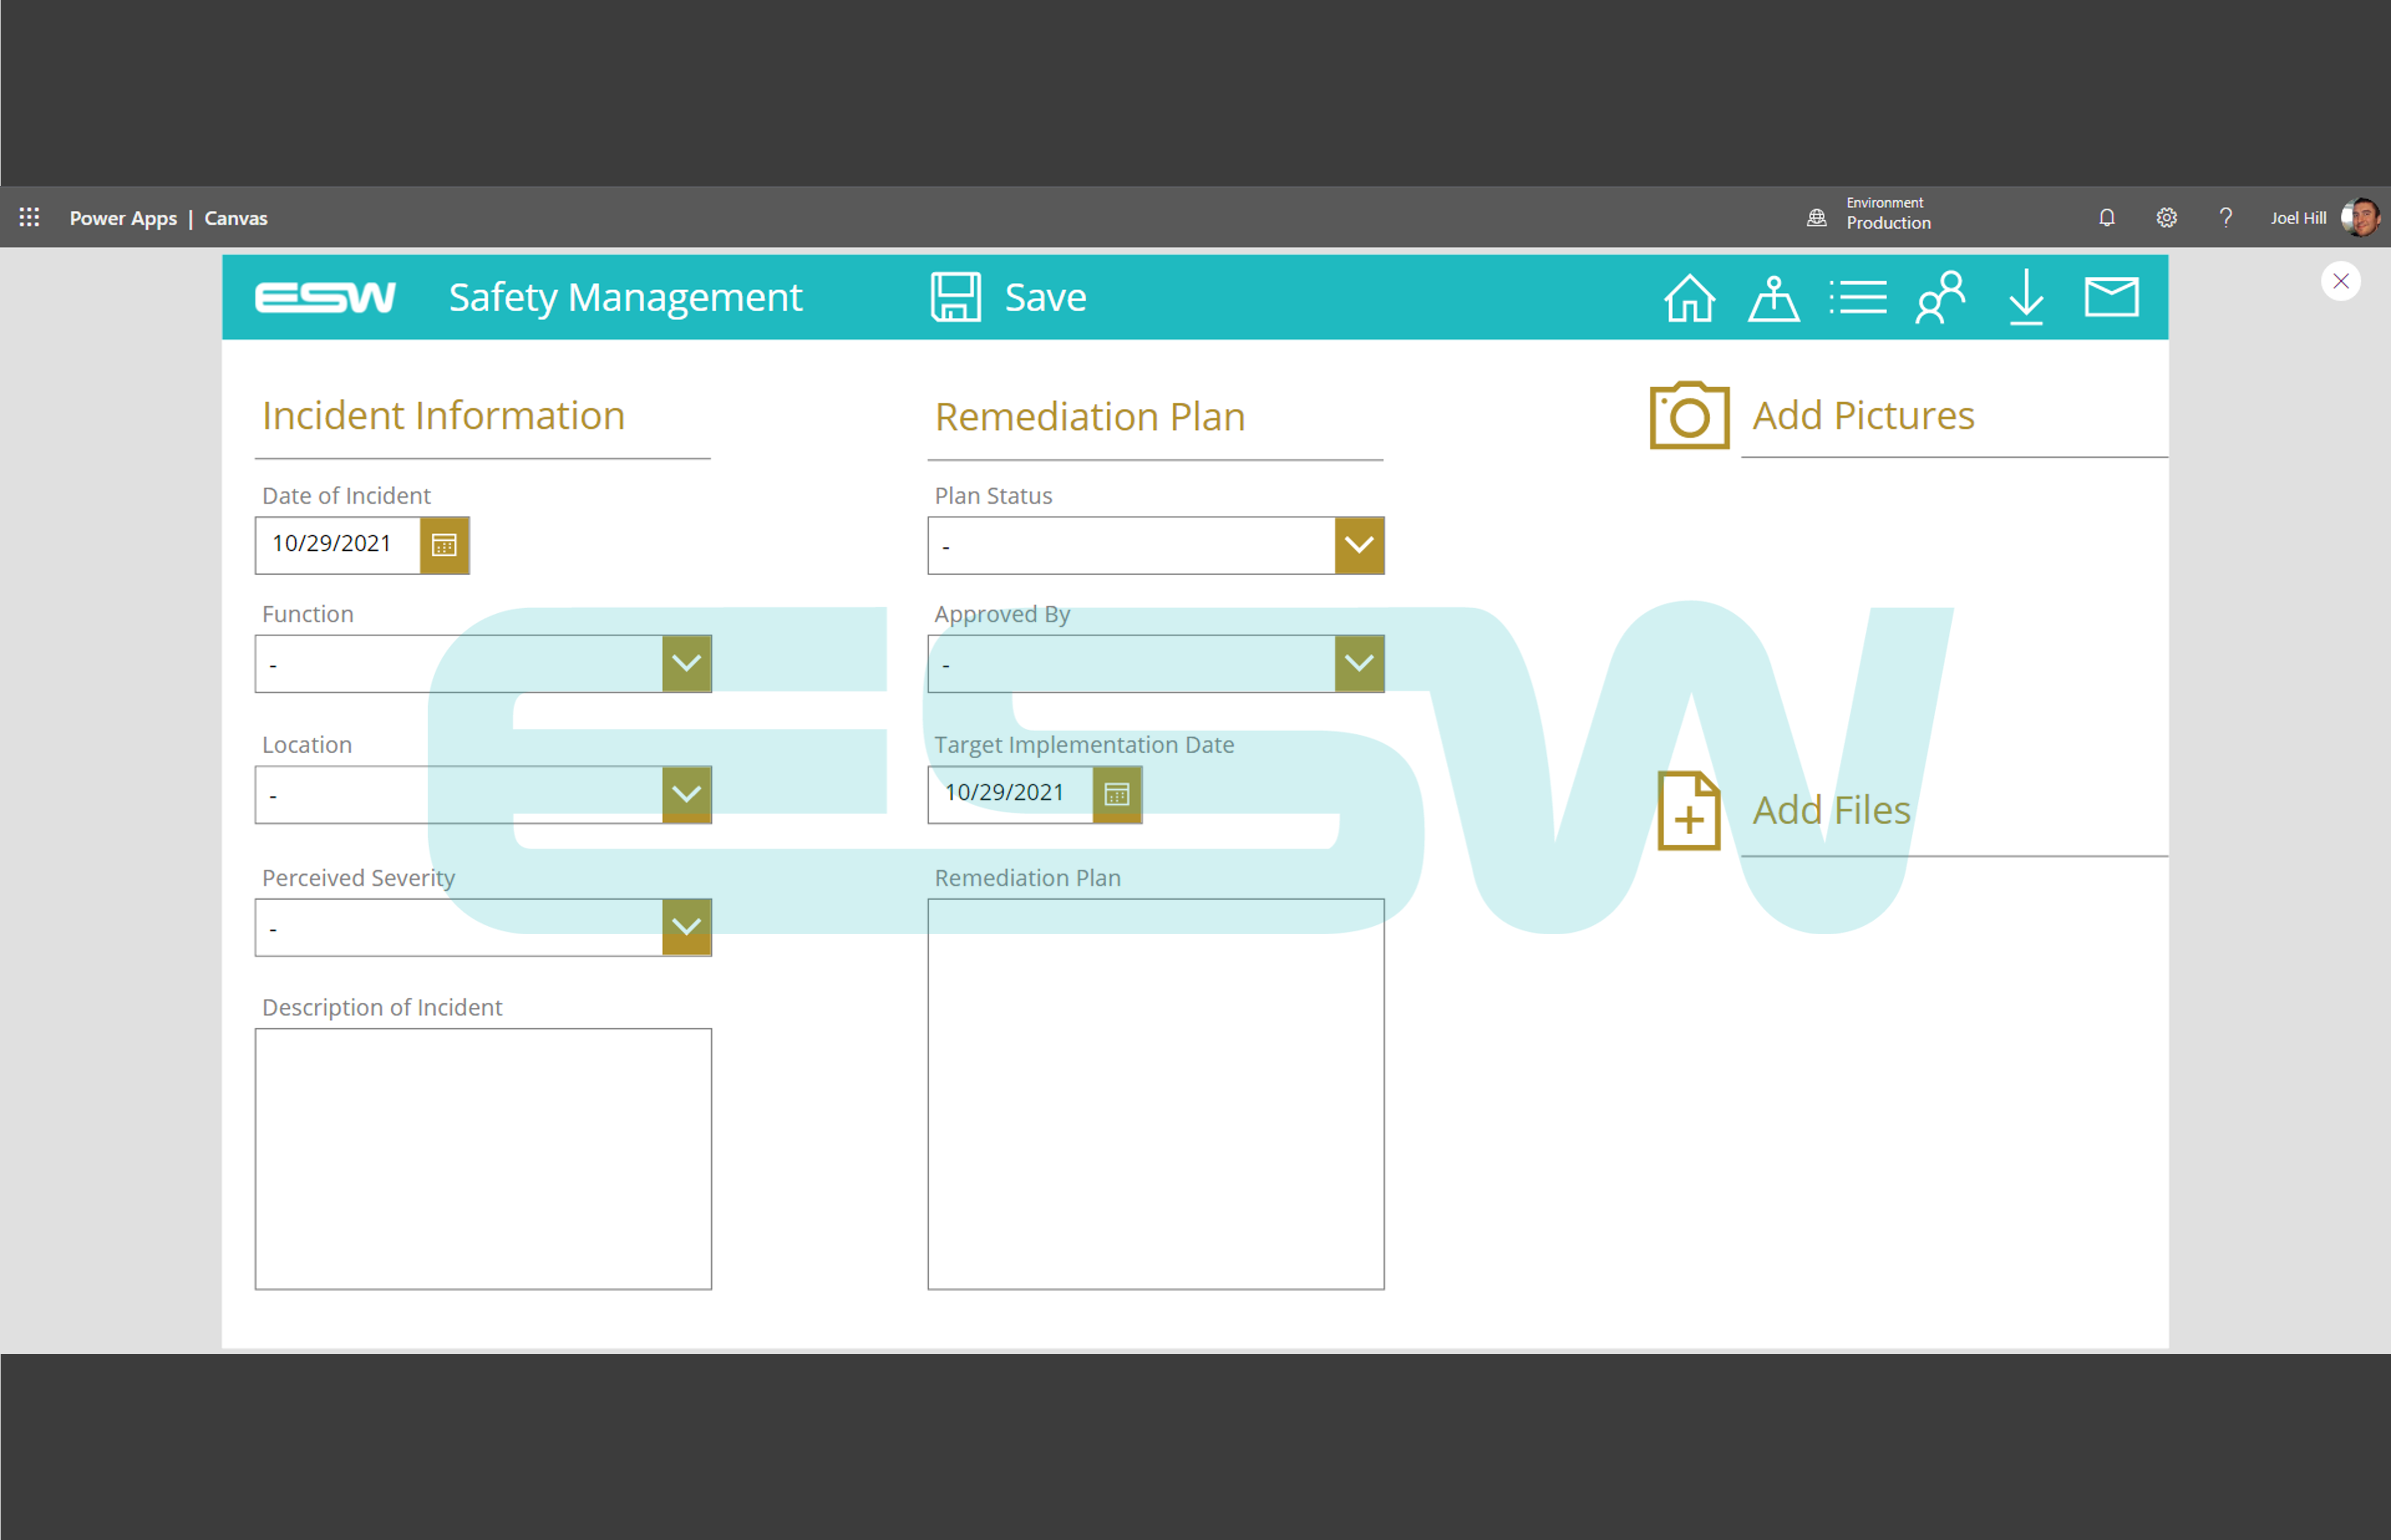 Example of a Manufacturing Managing Safety Using Power Apps